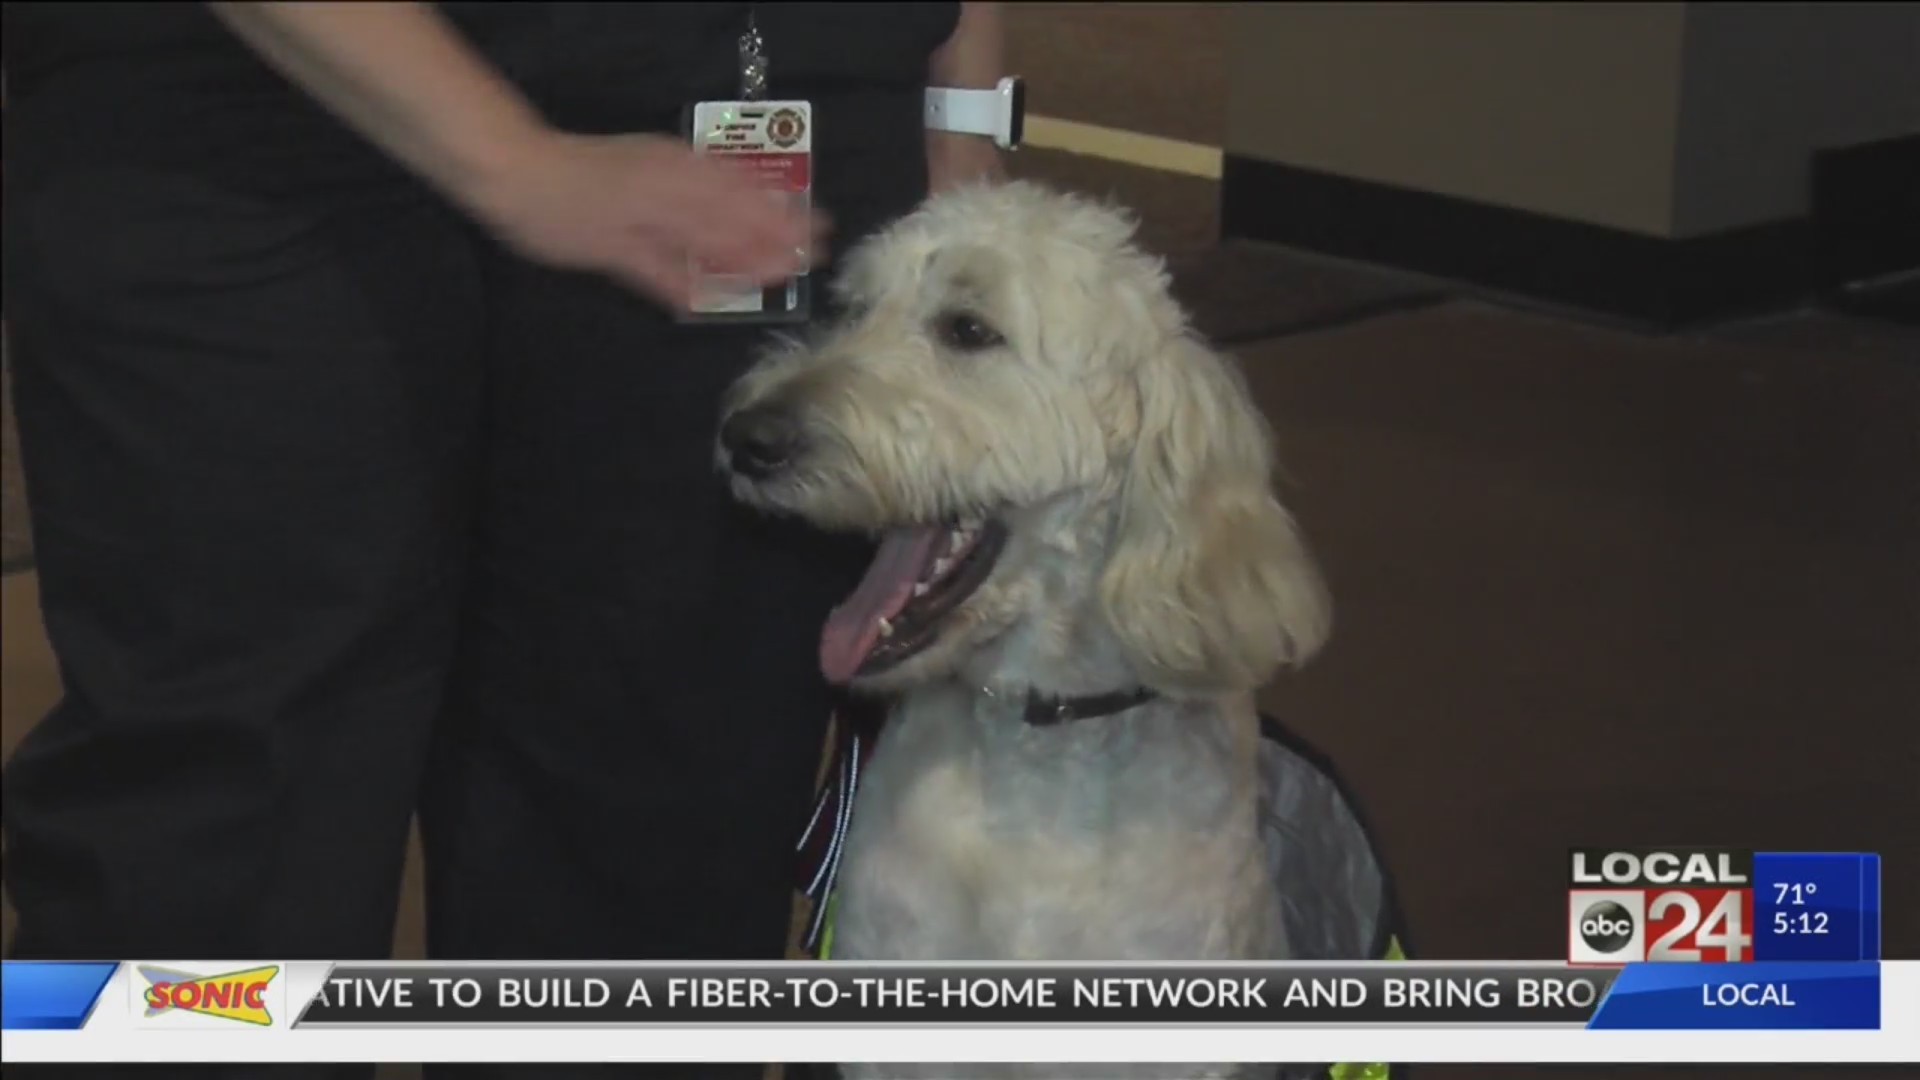 We got to meet the Memphis Fire Department's newest member - Wilson the Therapy Dog!